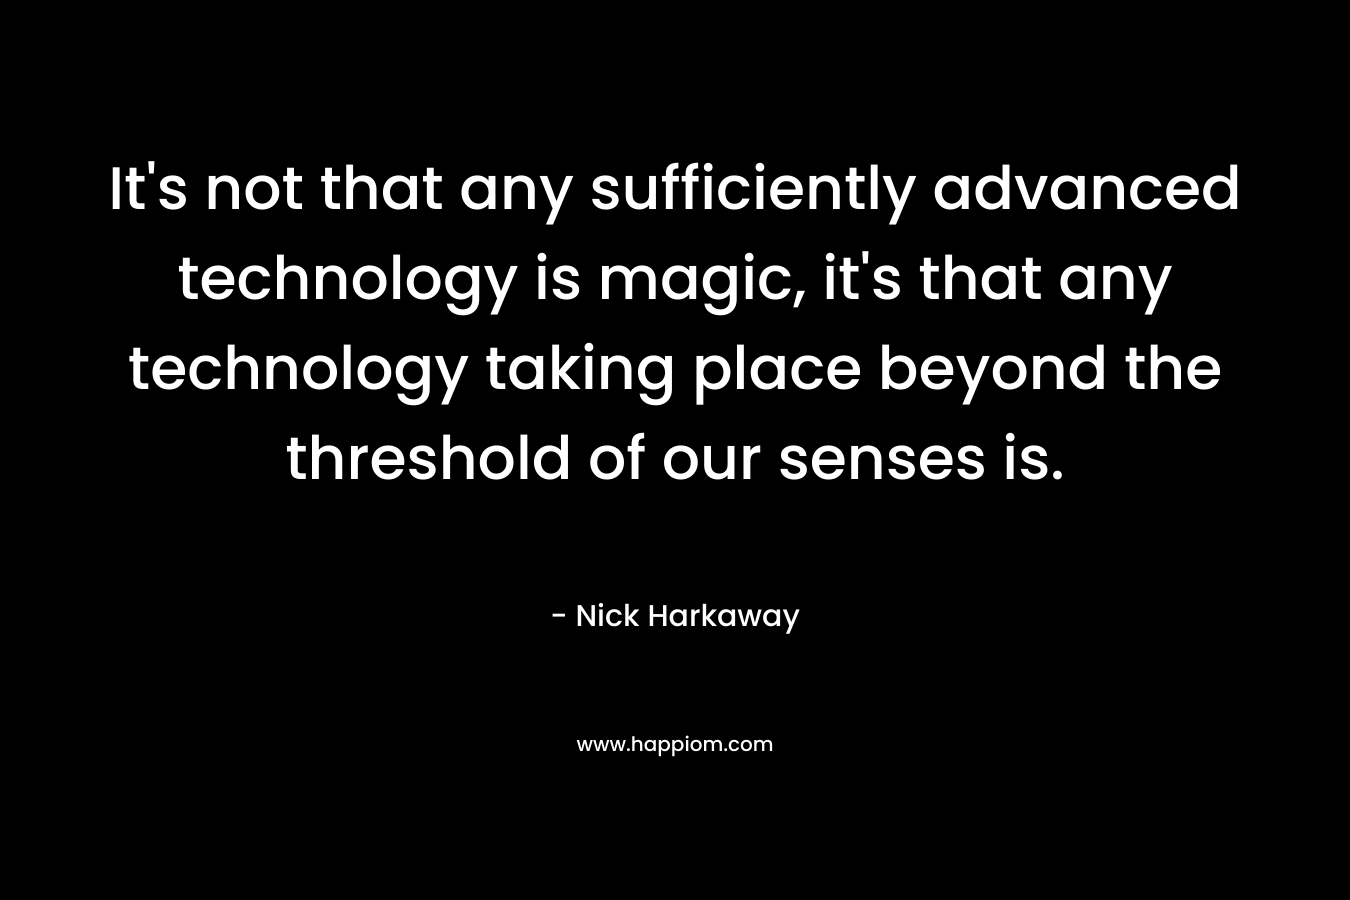 It's not that any sufficiently advanced technology is magic, it's that any technology taking place beyond the threshold of our senses is.